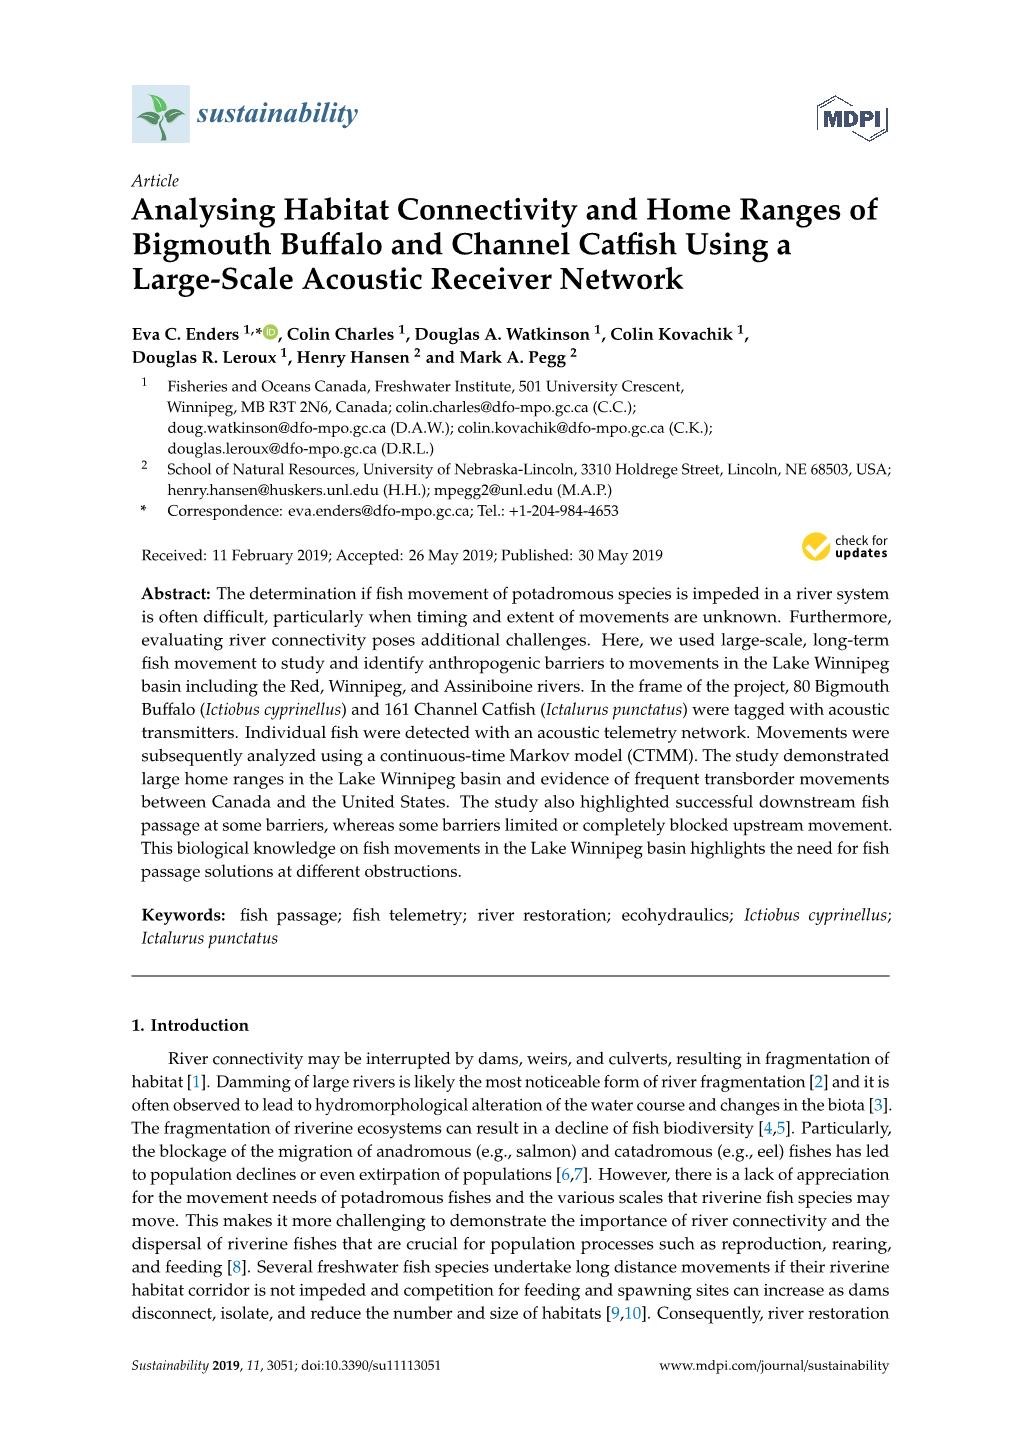 Analysing Habitat Connectivity and Home Ranges of Bigmouth Buffalo and Channel Catfish Using a Large-Scale Acoustic Receiver